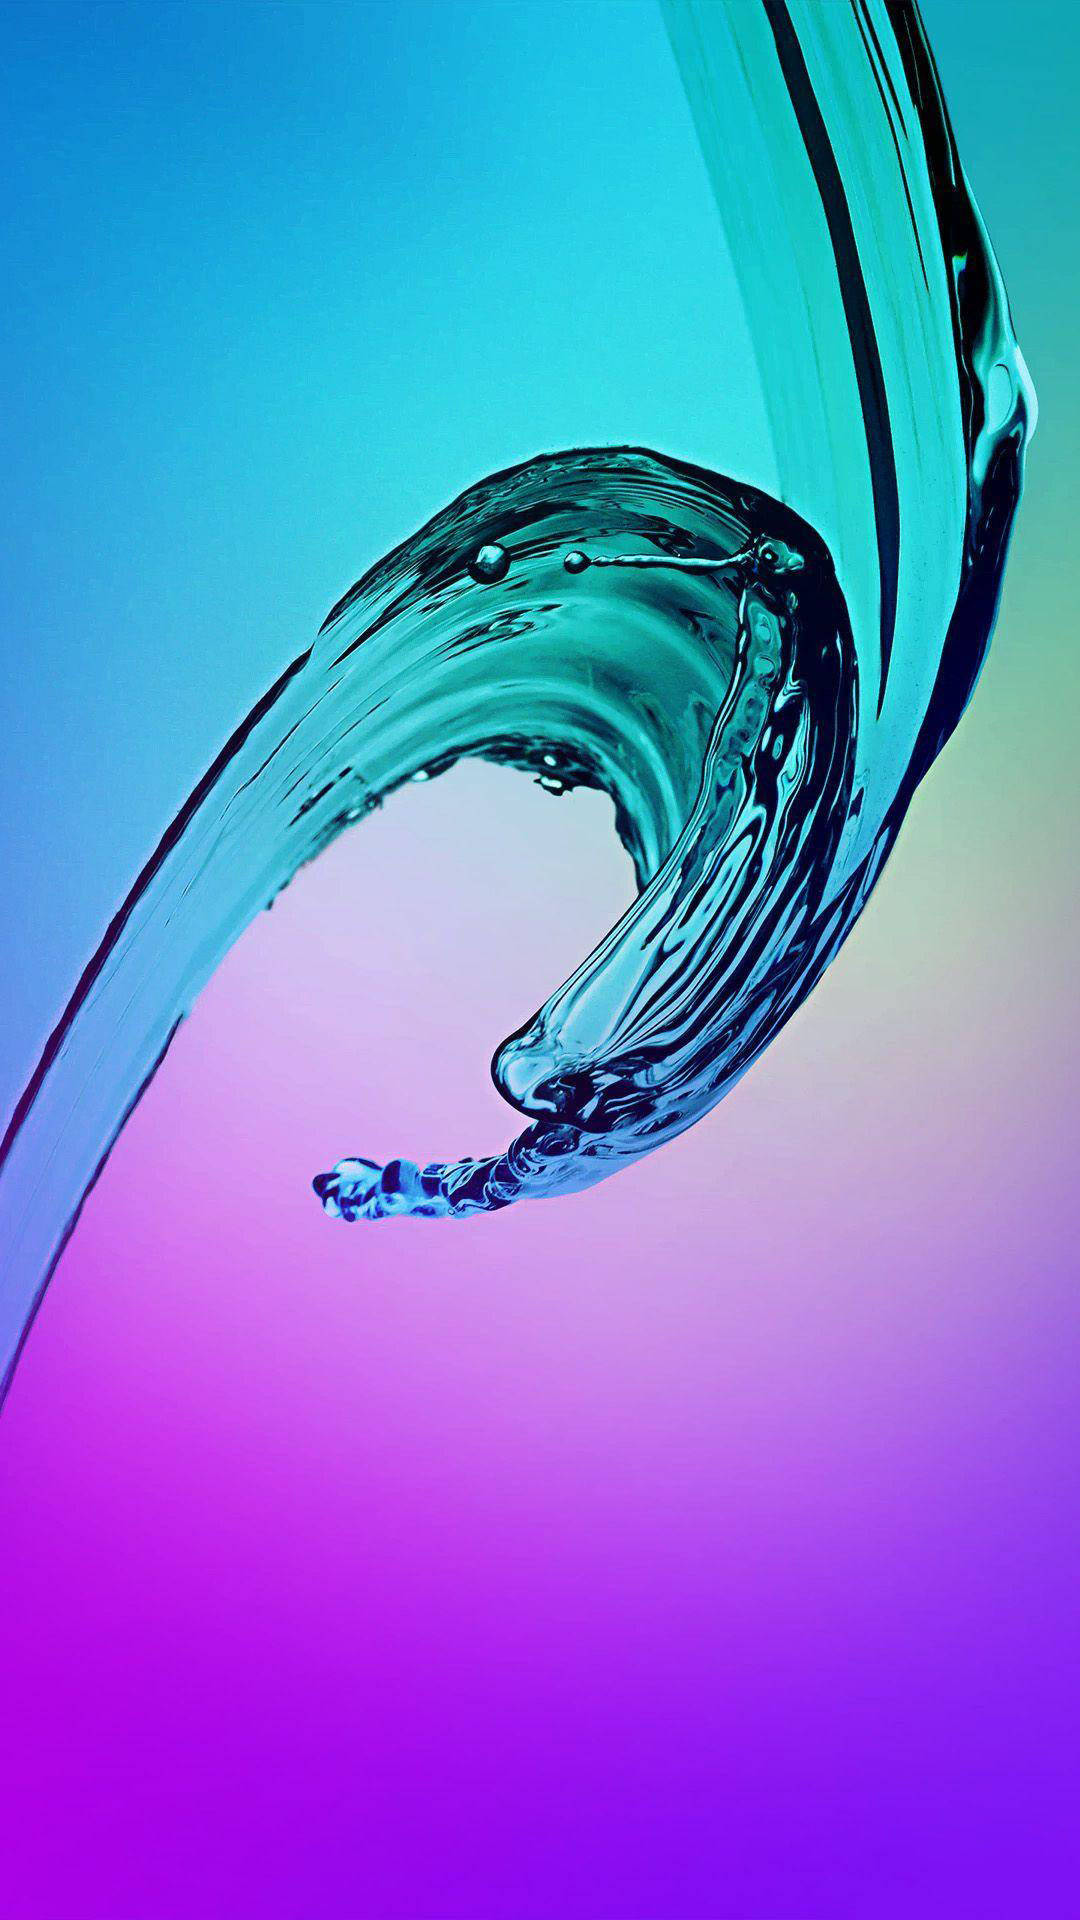 Samsung Mobile Glossy Fluid Background